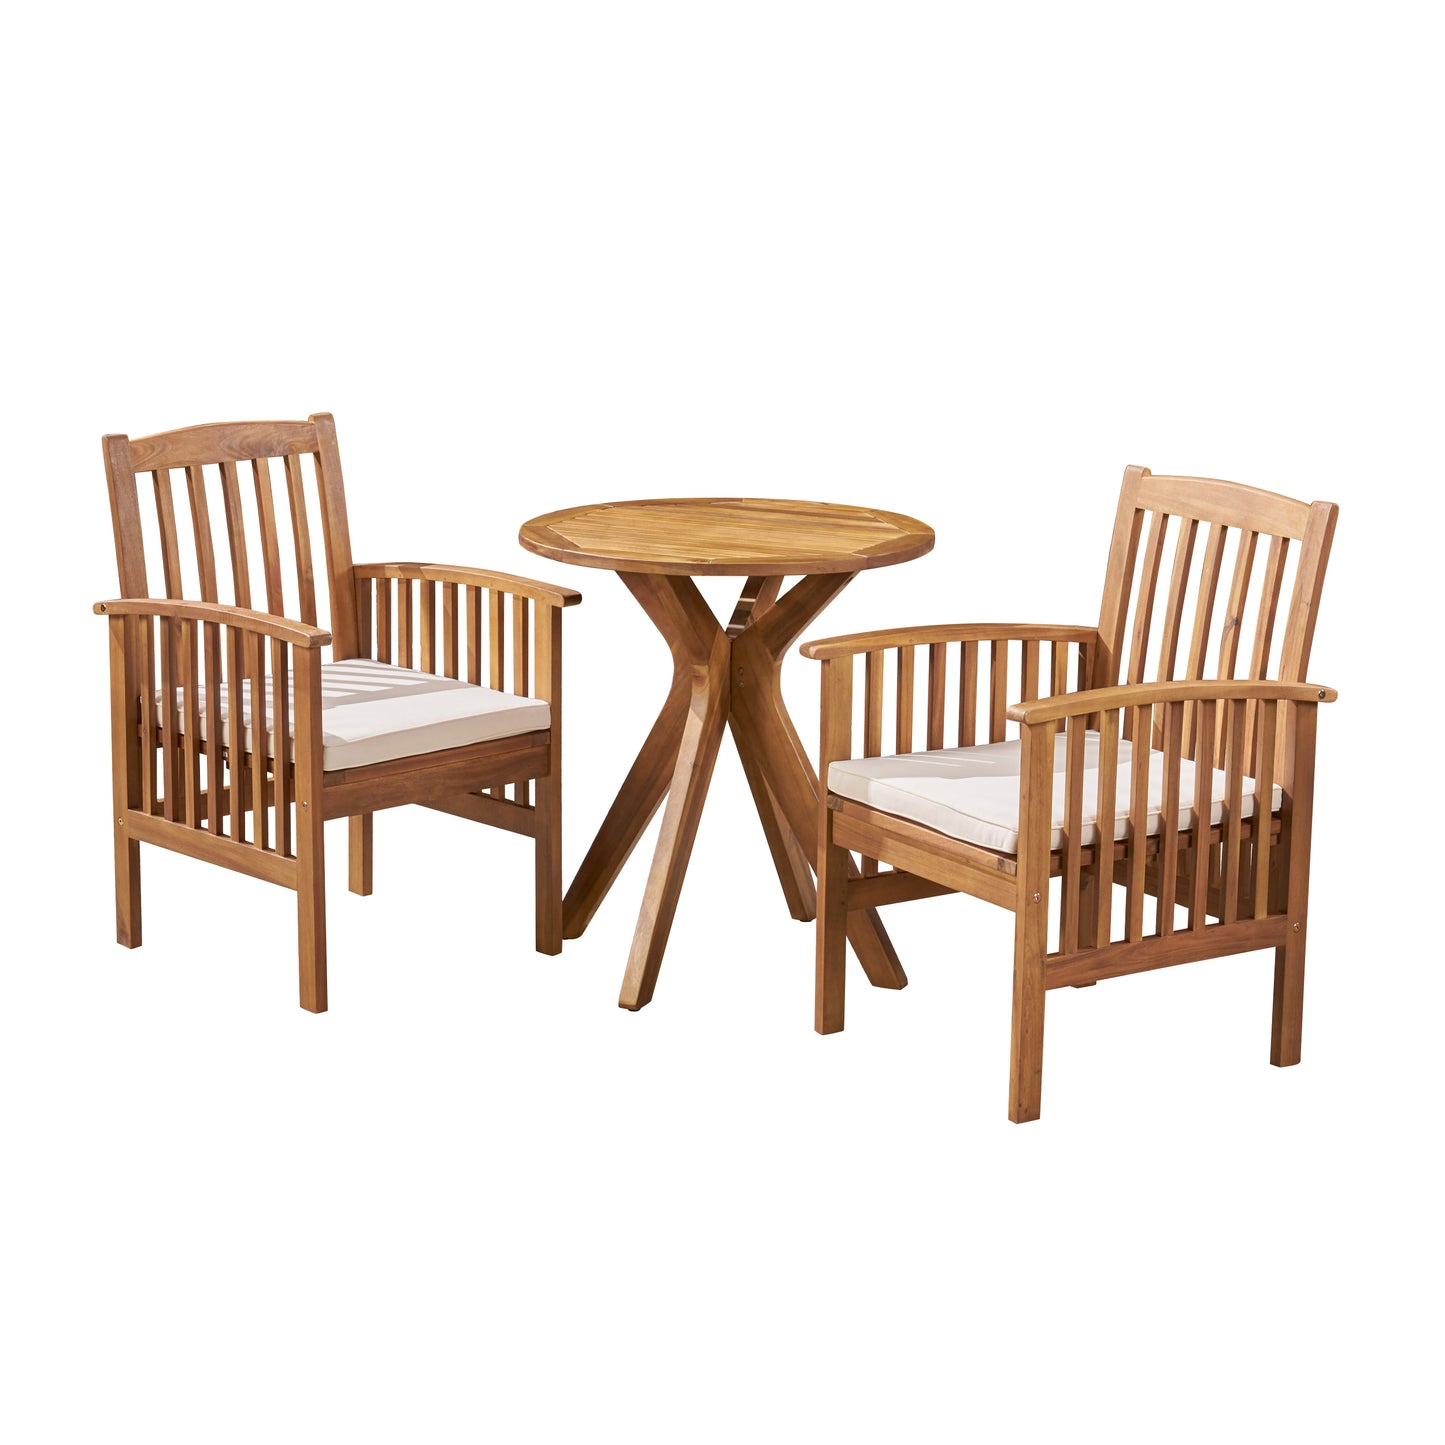 Phoenix Outdoor Acacia 2-Seater Bistro Set with Cushions and 28" Round Table with X-Legs